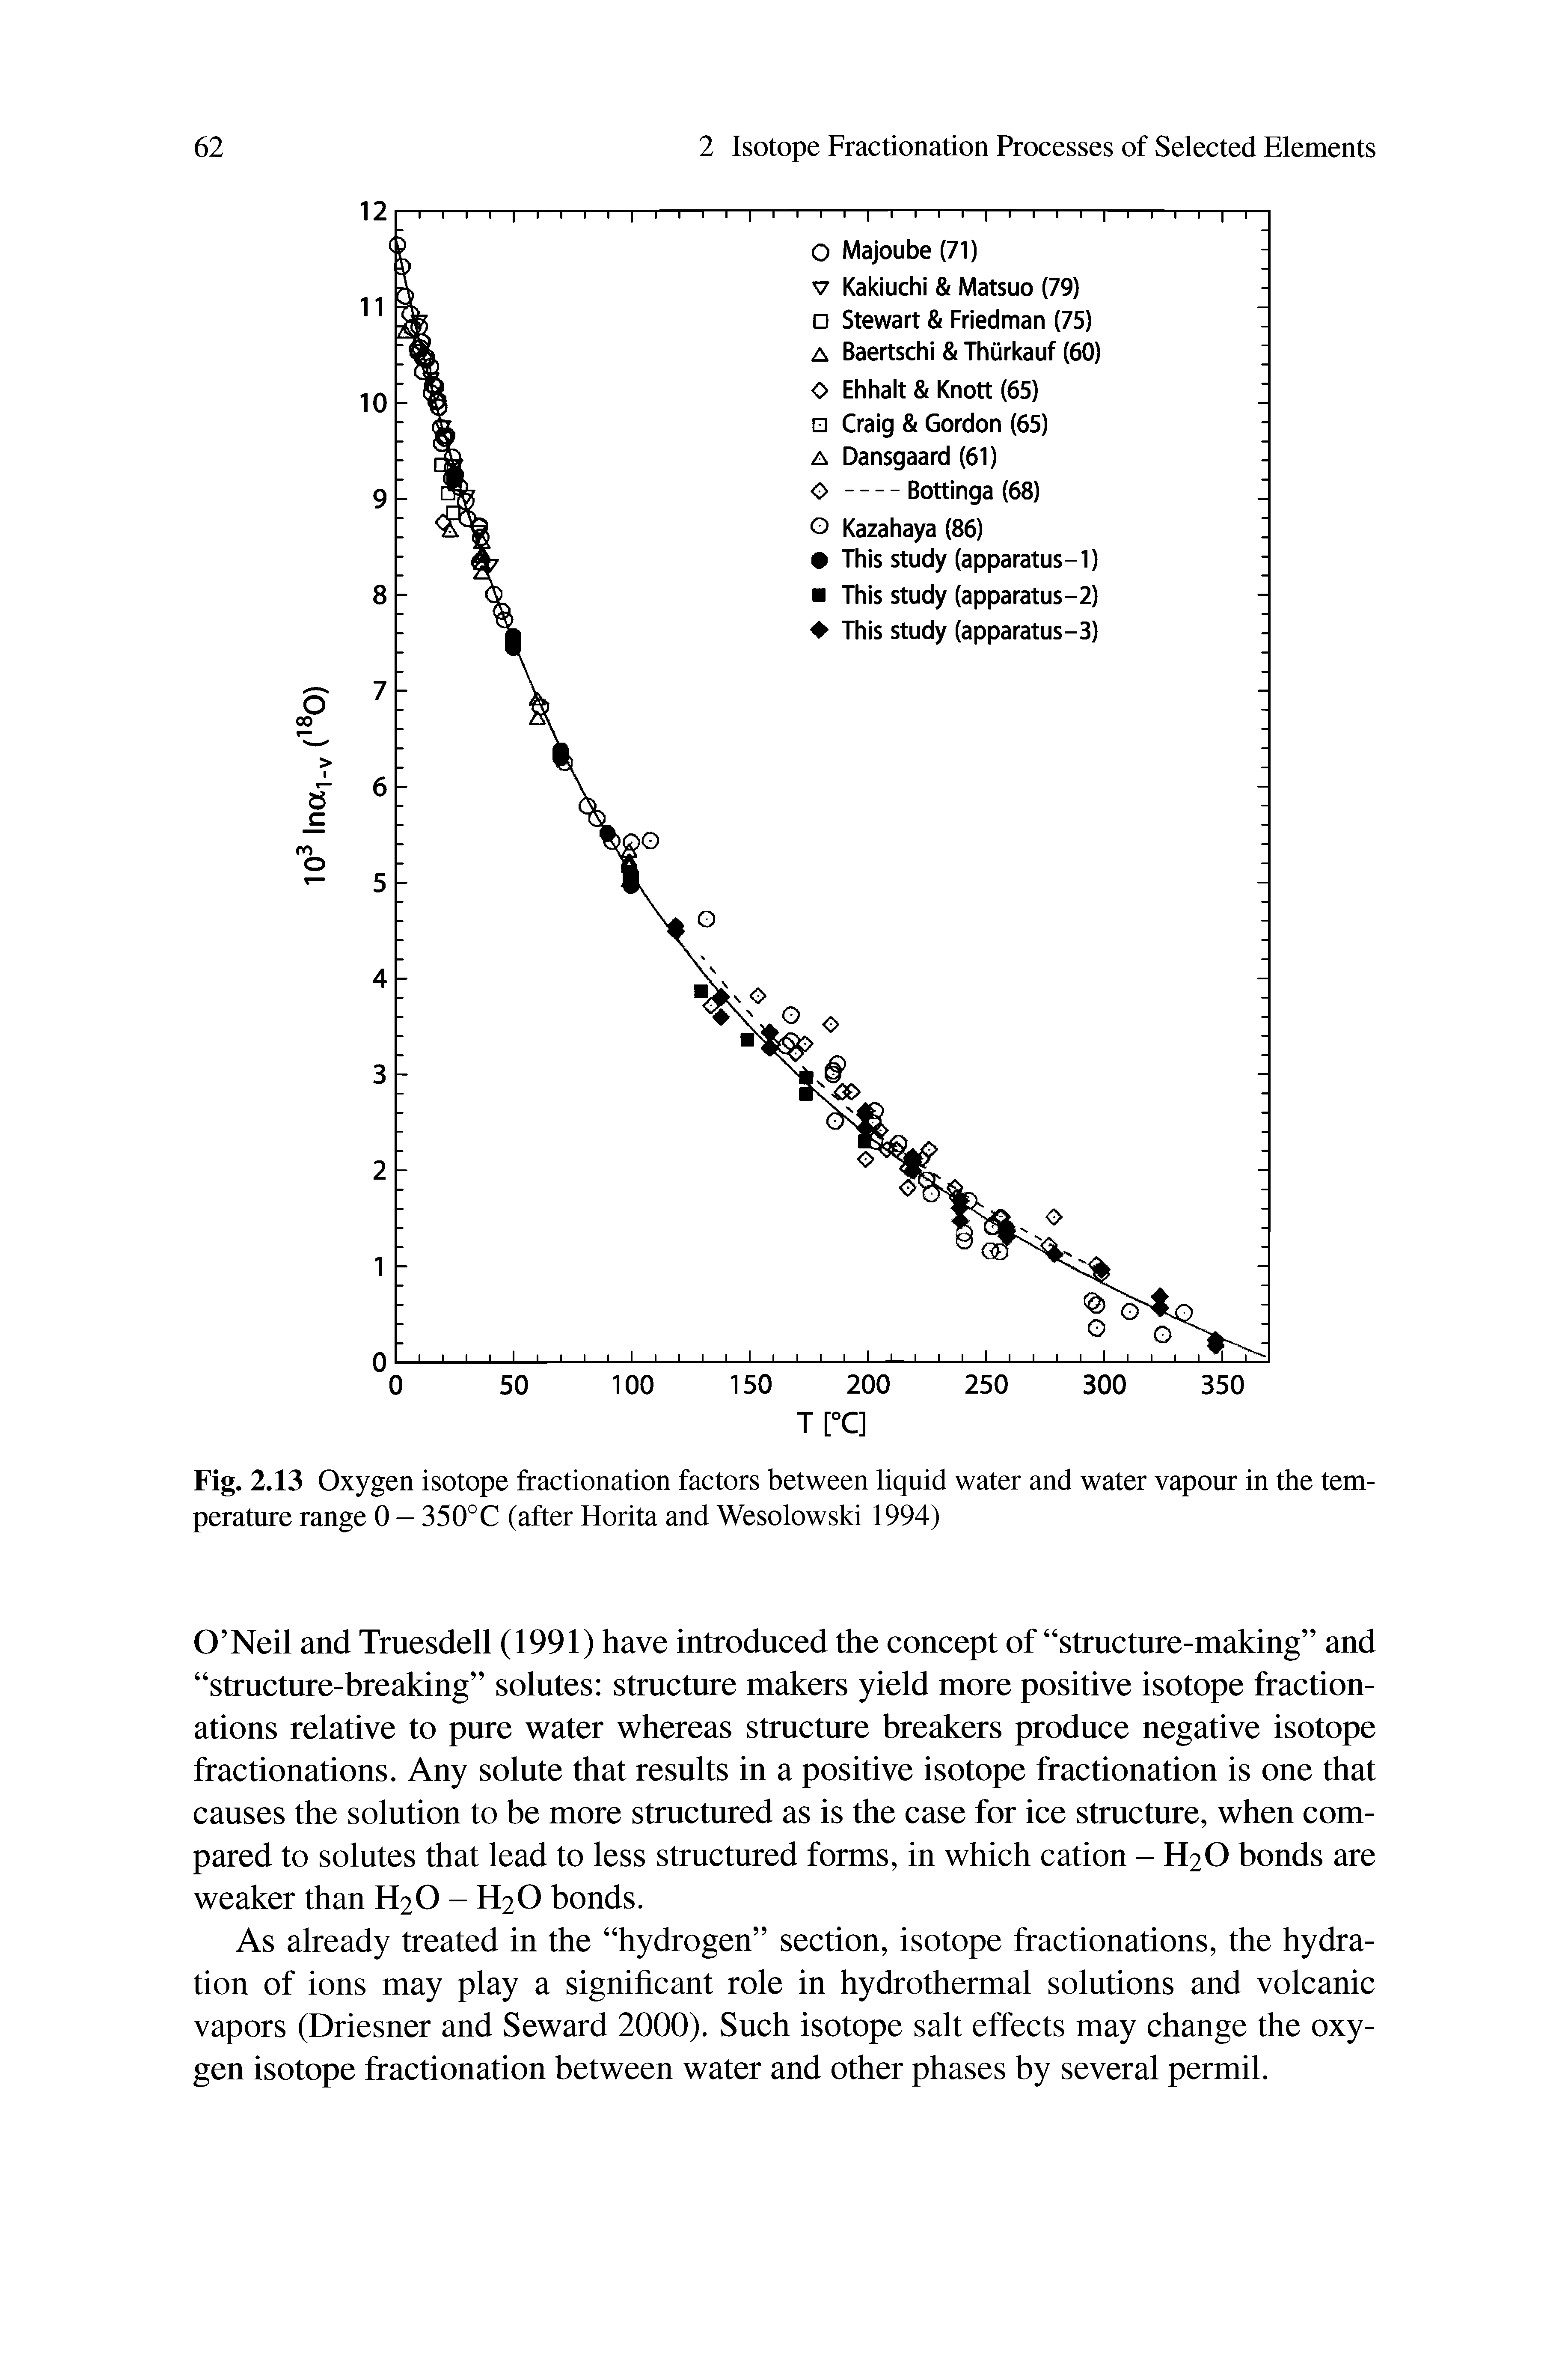 Fig. 2.13 Oxygen isotope fractionation factors between liquid water and water vapour in the temperature range 0 — 350° C (after Horita and Wesolowski 1994)...